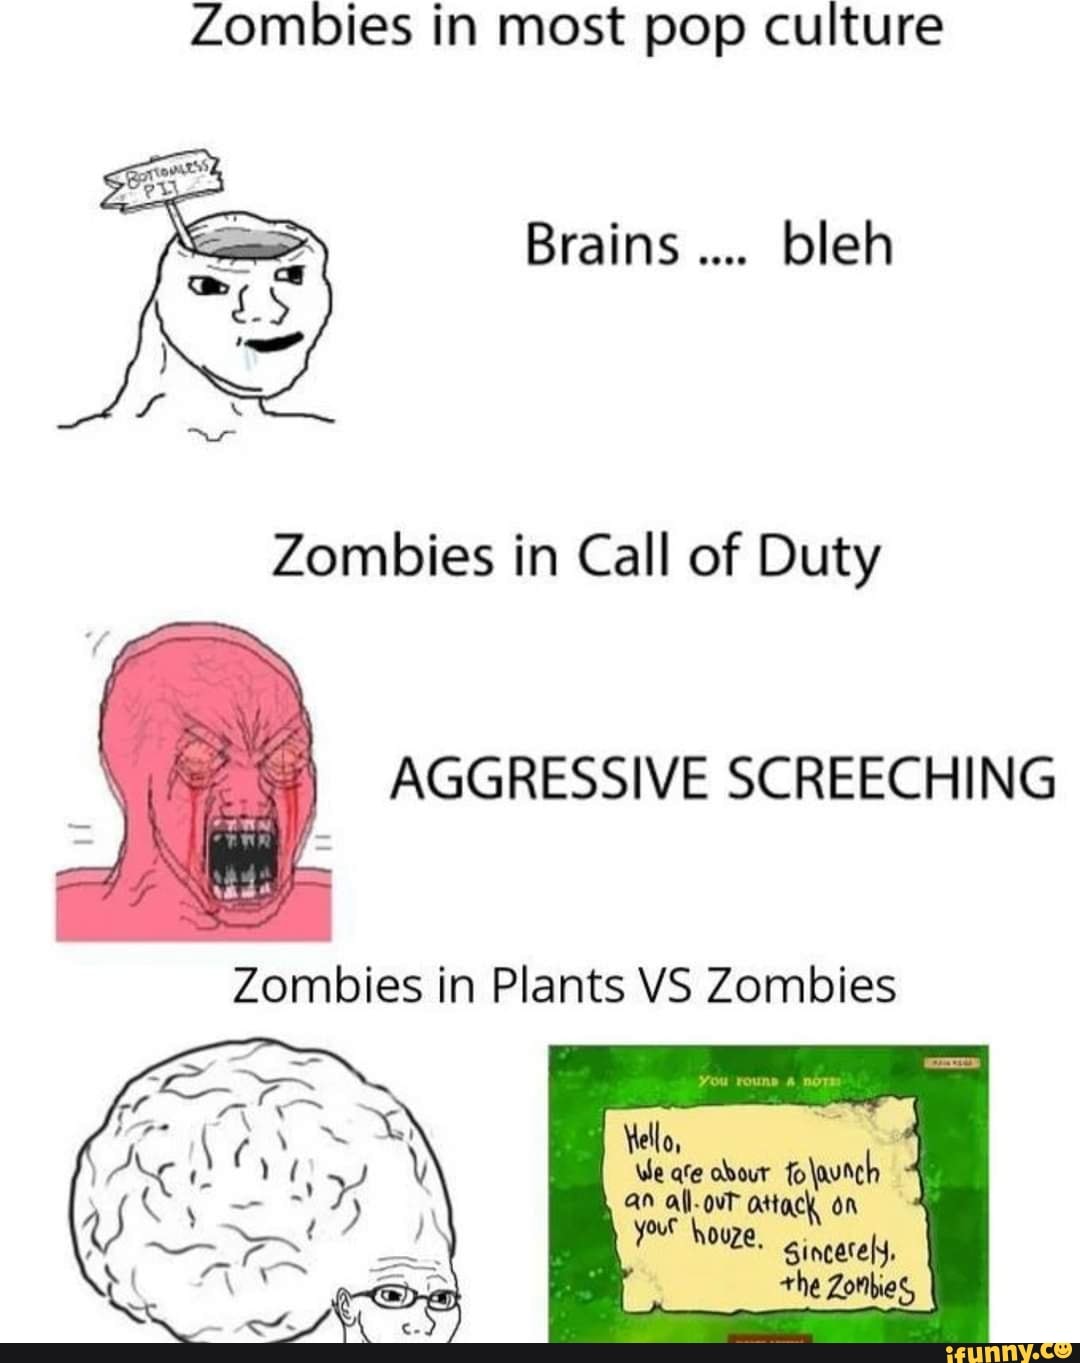 Zombies in most pop culture Brains bleh Zombies in Call of Duty AGGRESSIVE  SCREECHING Zombies in Plants VS Zombies ello, We fe cheur folavtch an  attack on +he Zombies - iFunny Brazil